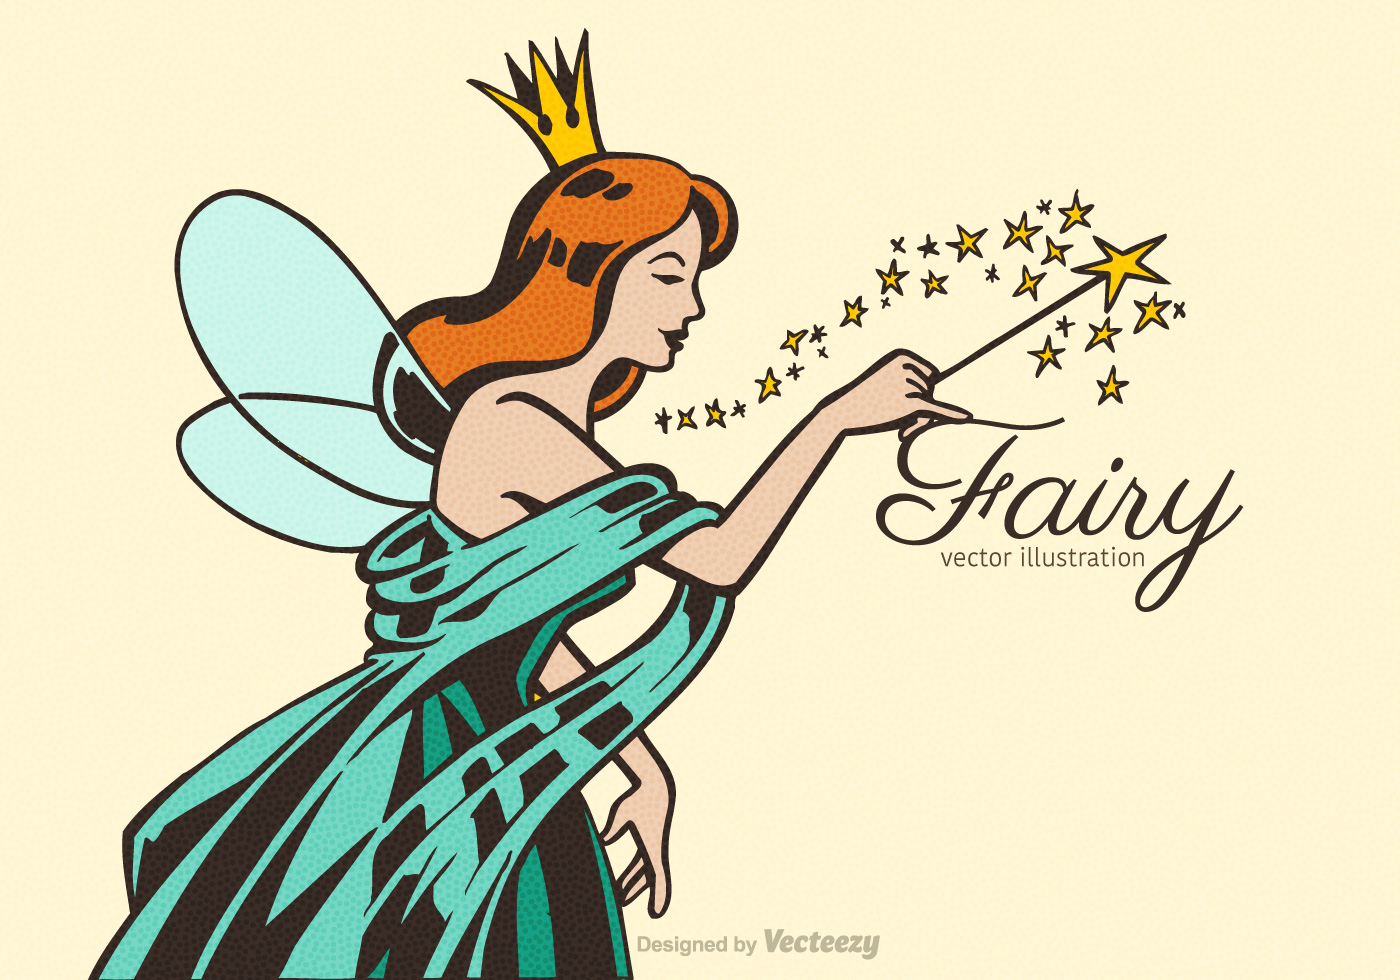 Download Fairy Godmother Free Vector Art - (3,935 Free Downloads)